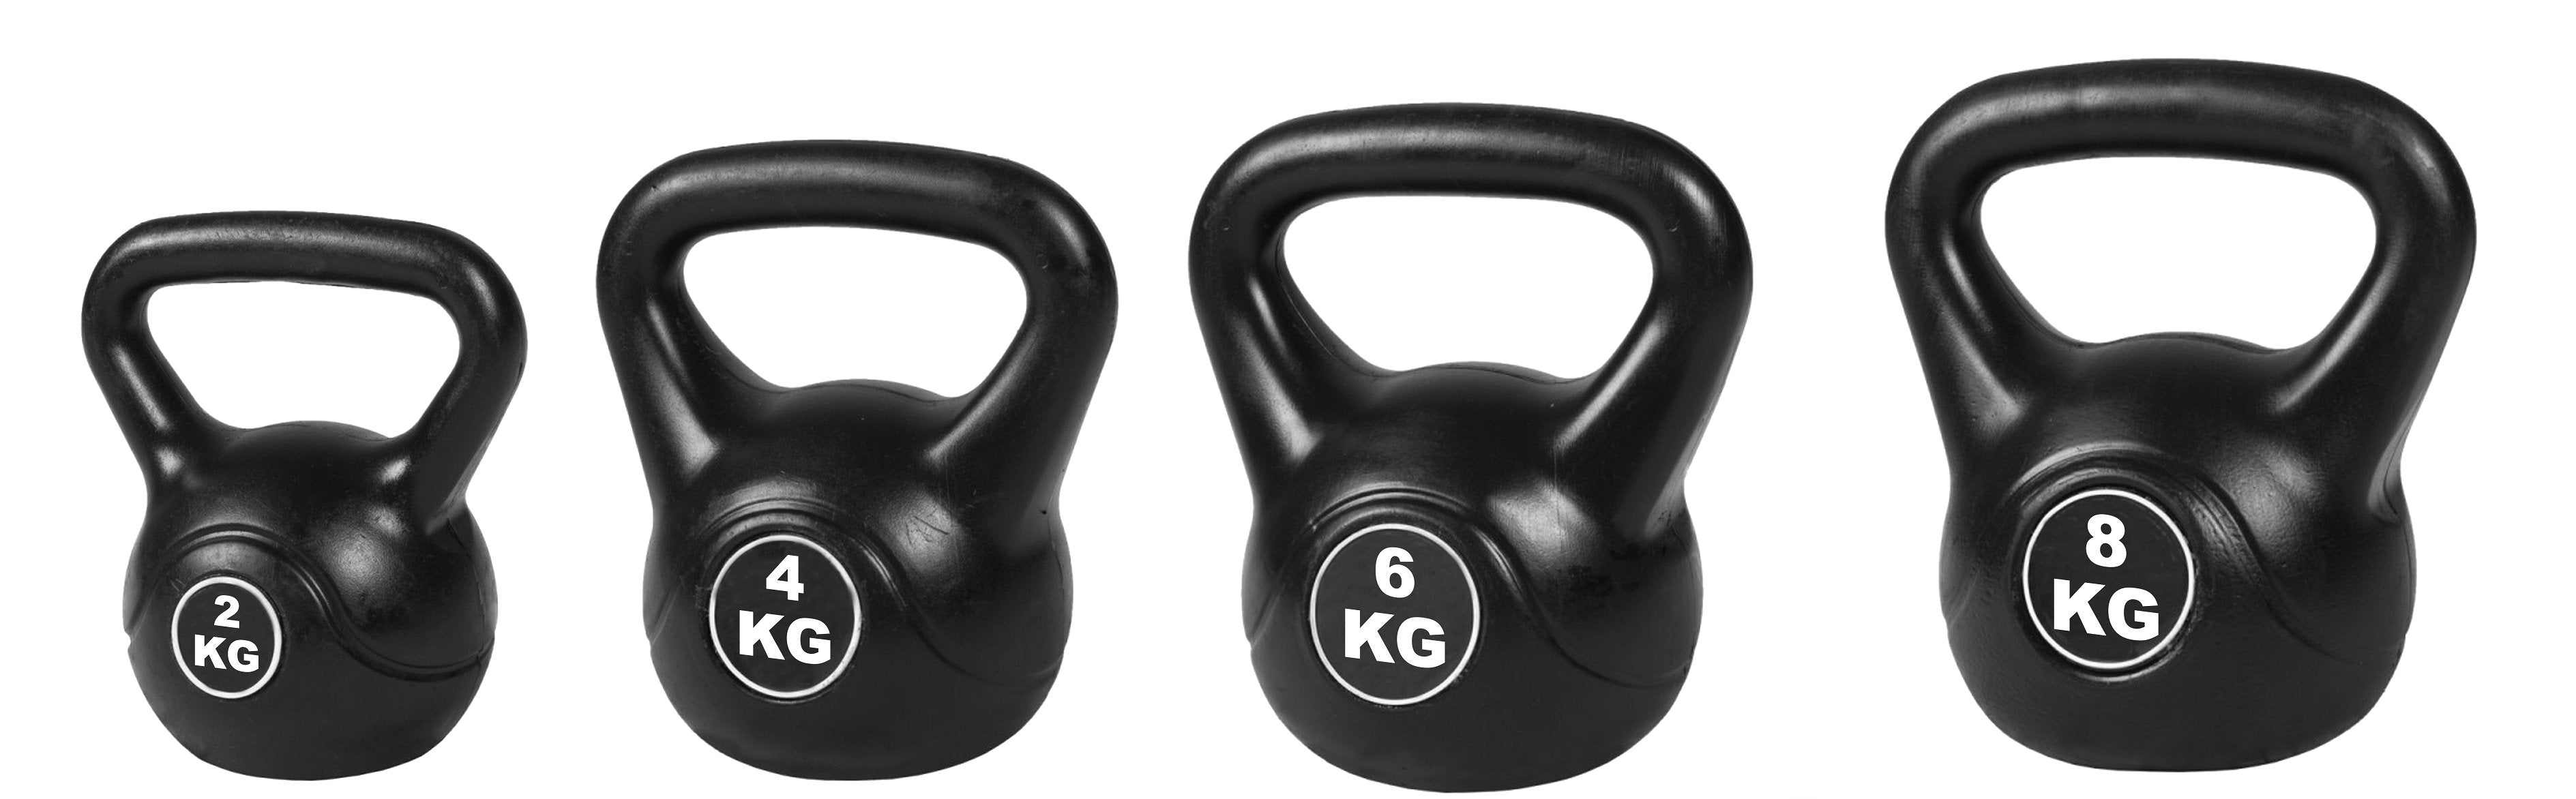 Fitness Accessories 4pcs Exercise Kettle Bell Weight Set 20KG